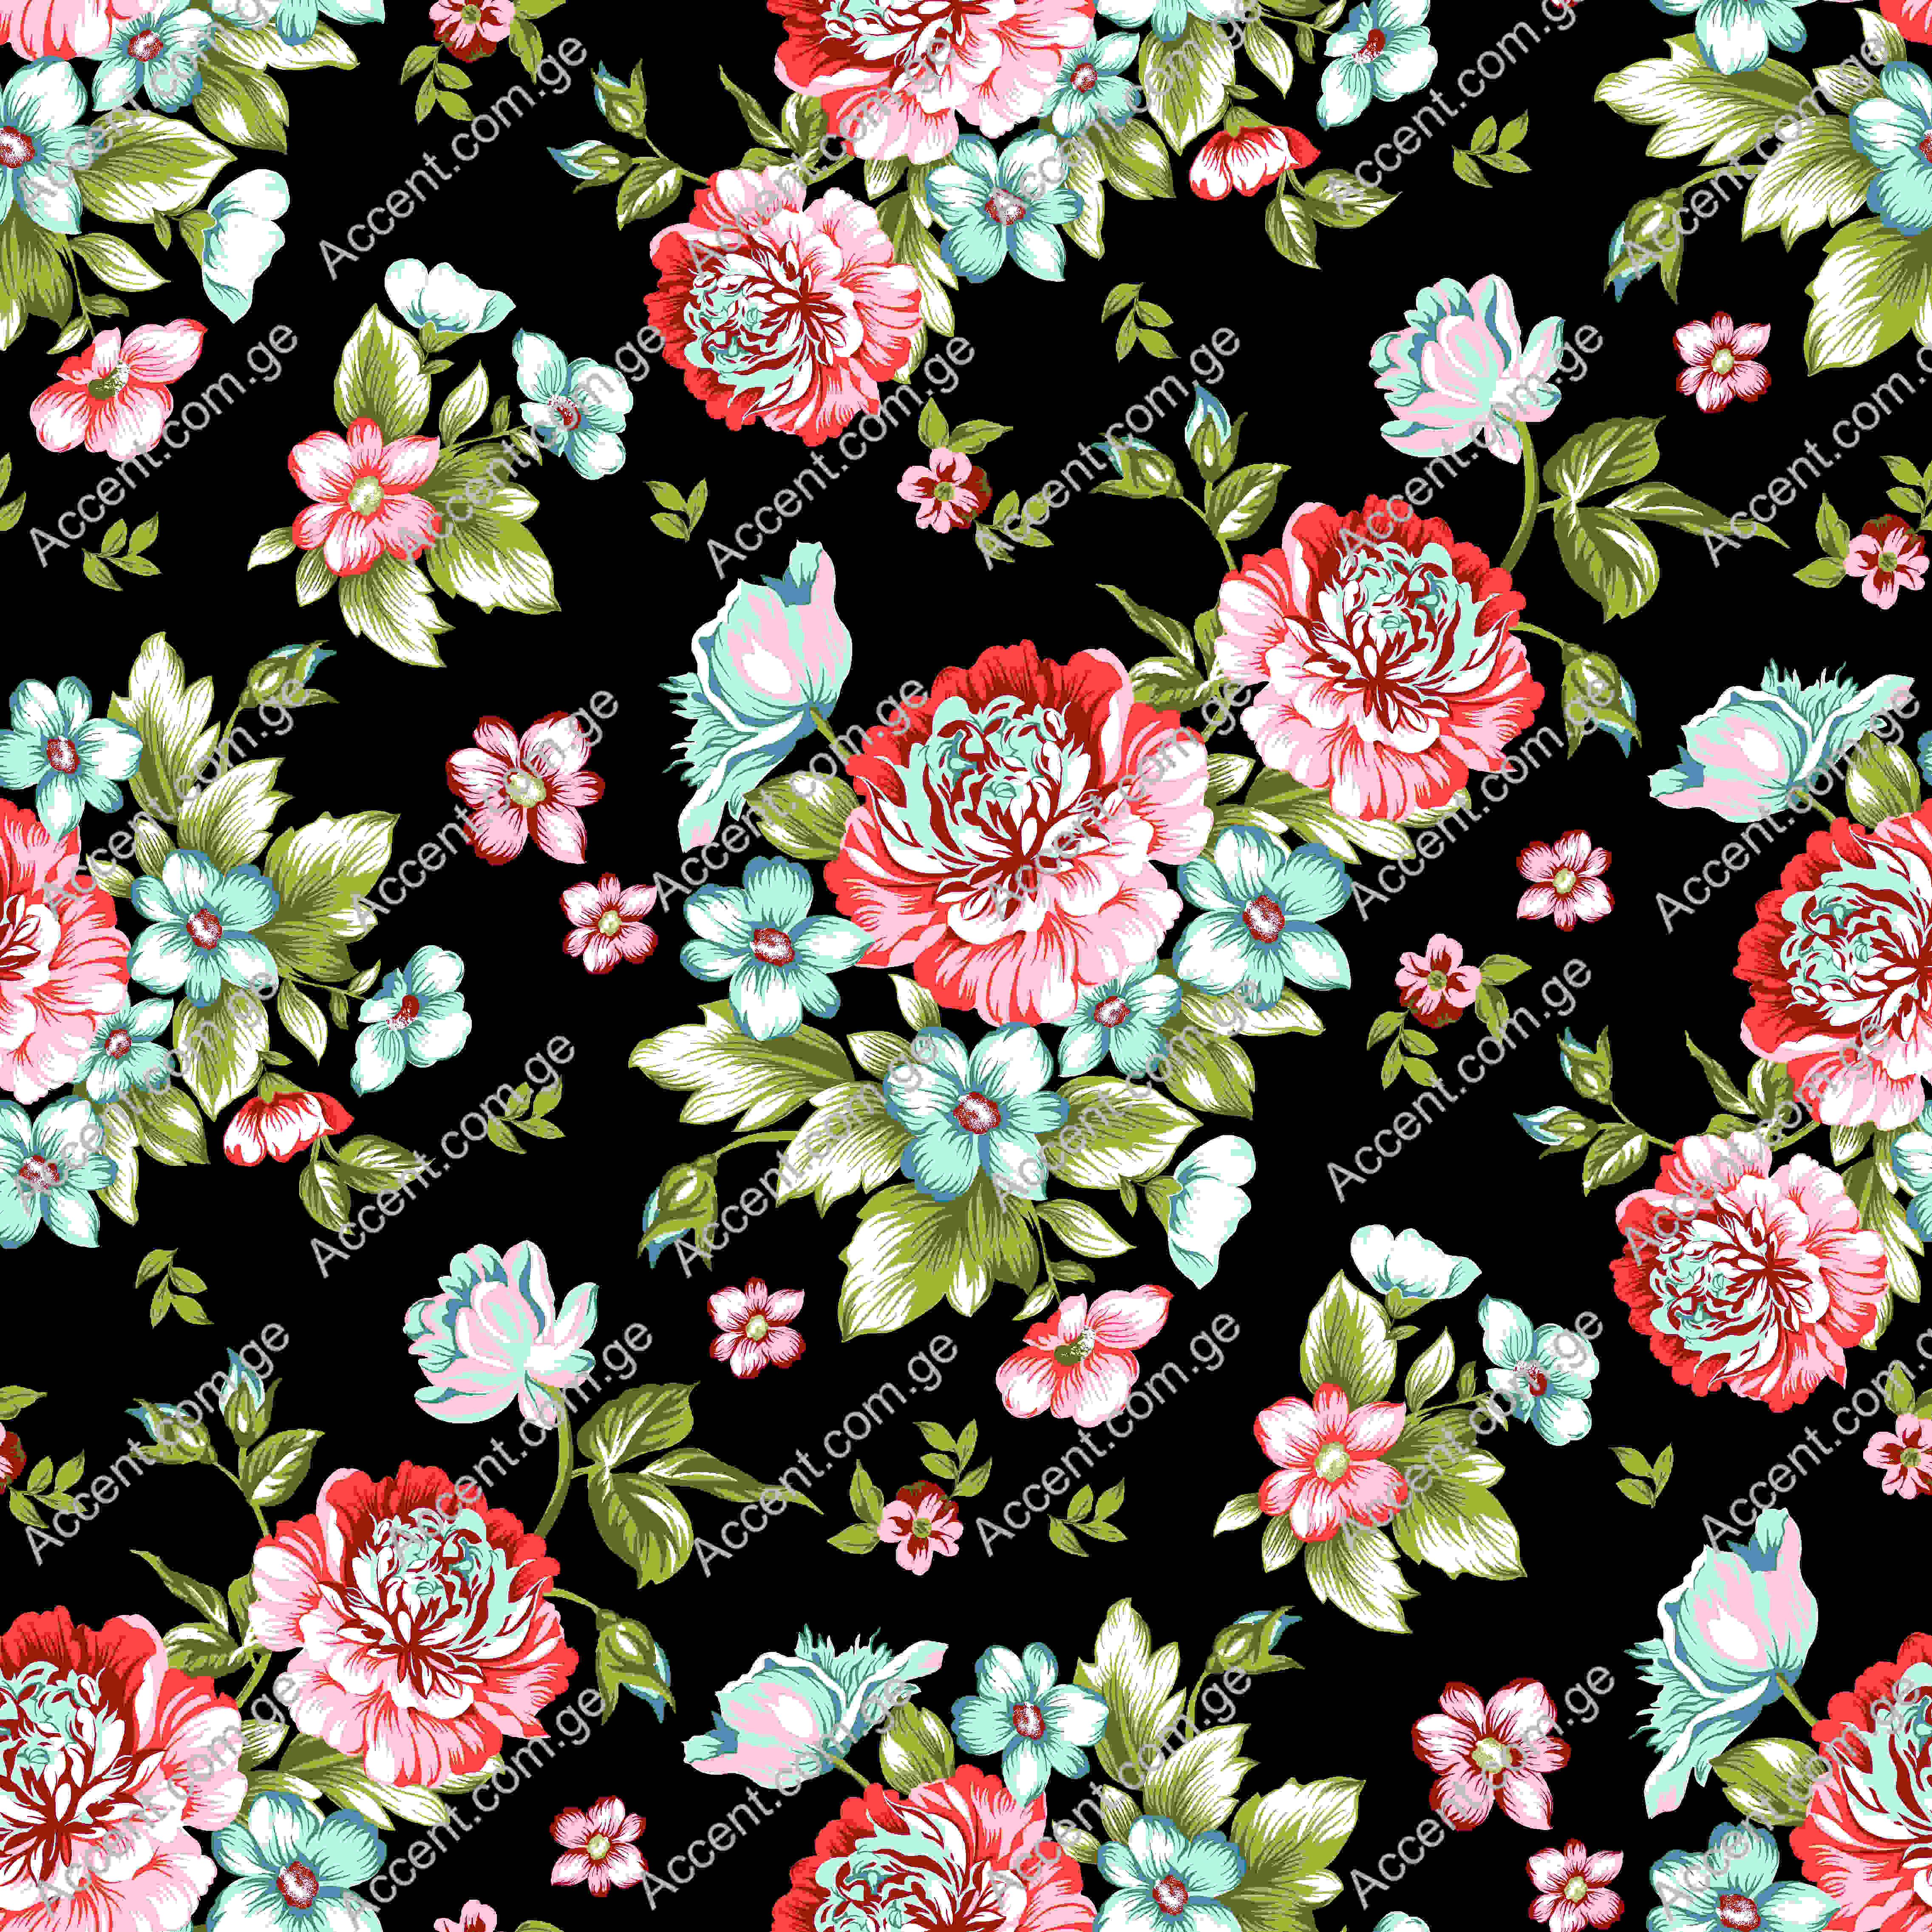 Black background with pink and blue flowers.